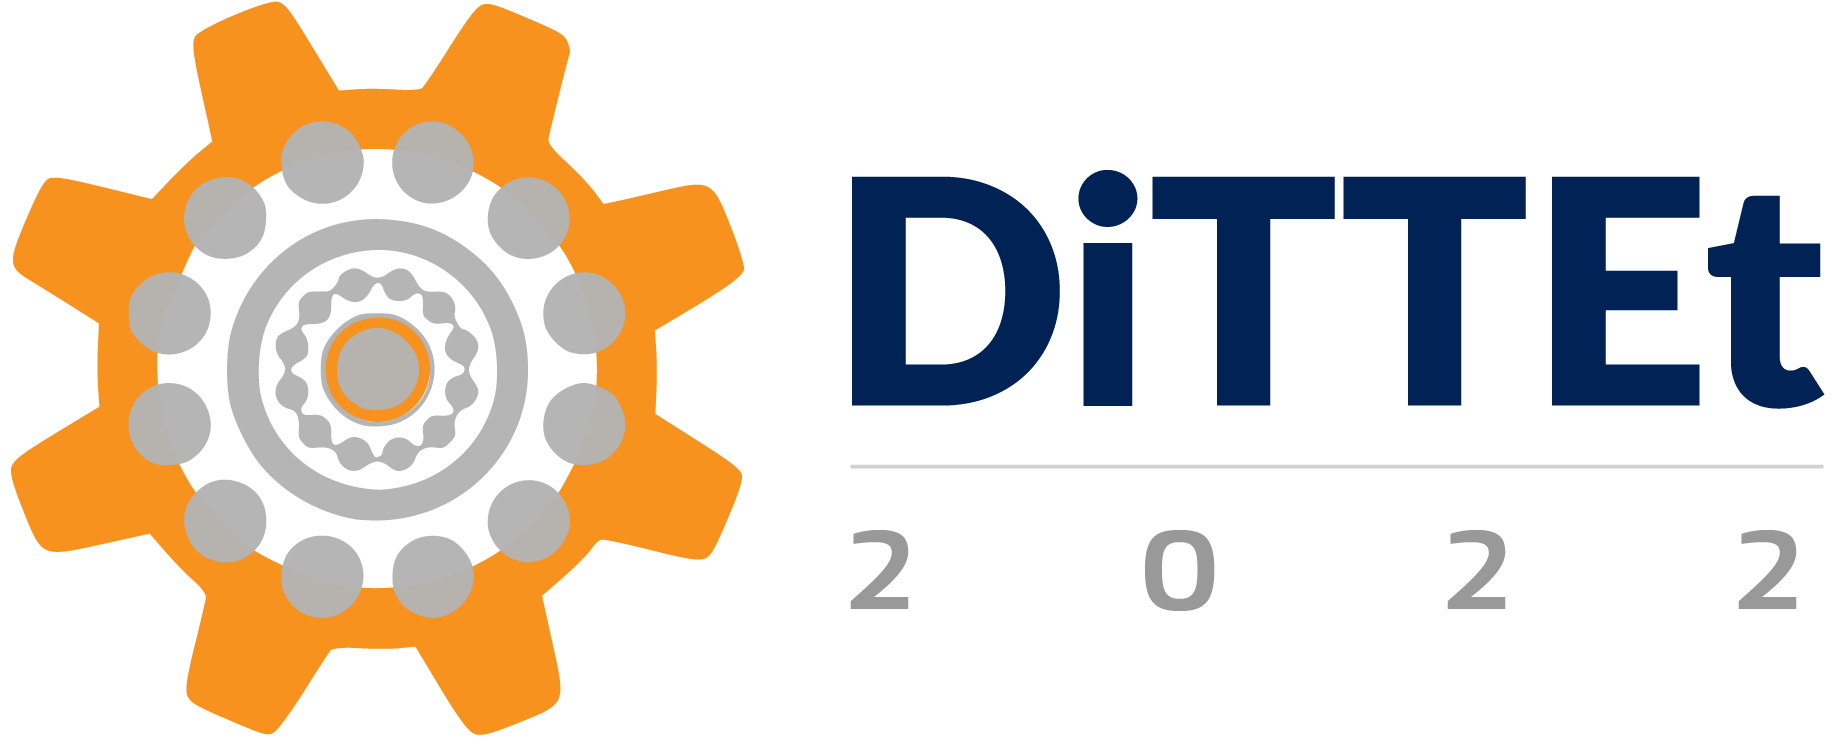 2nd International Conference on Disruptive Technologies, Tech Ethics and Artificial Intelligent (DiTTEt)